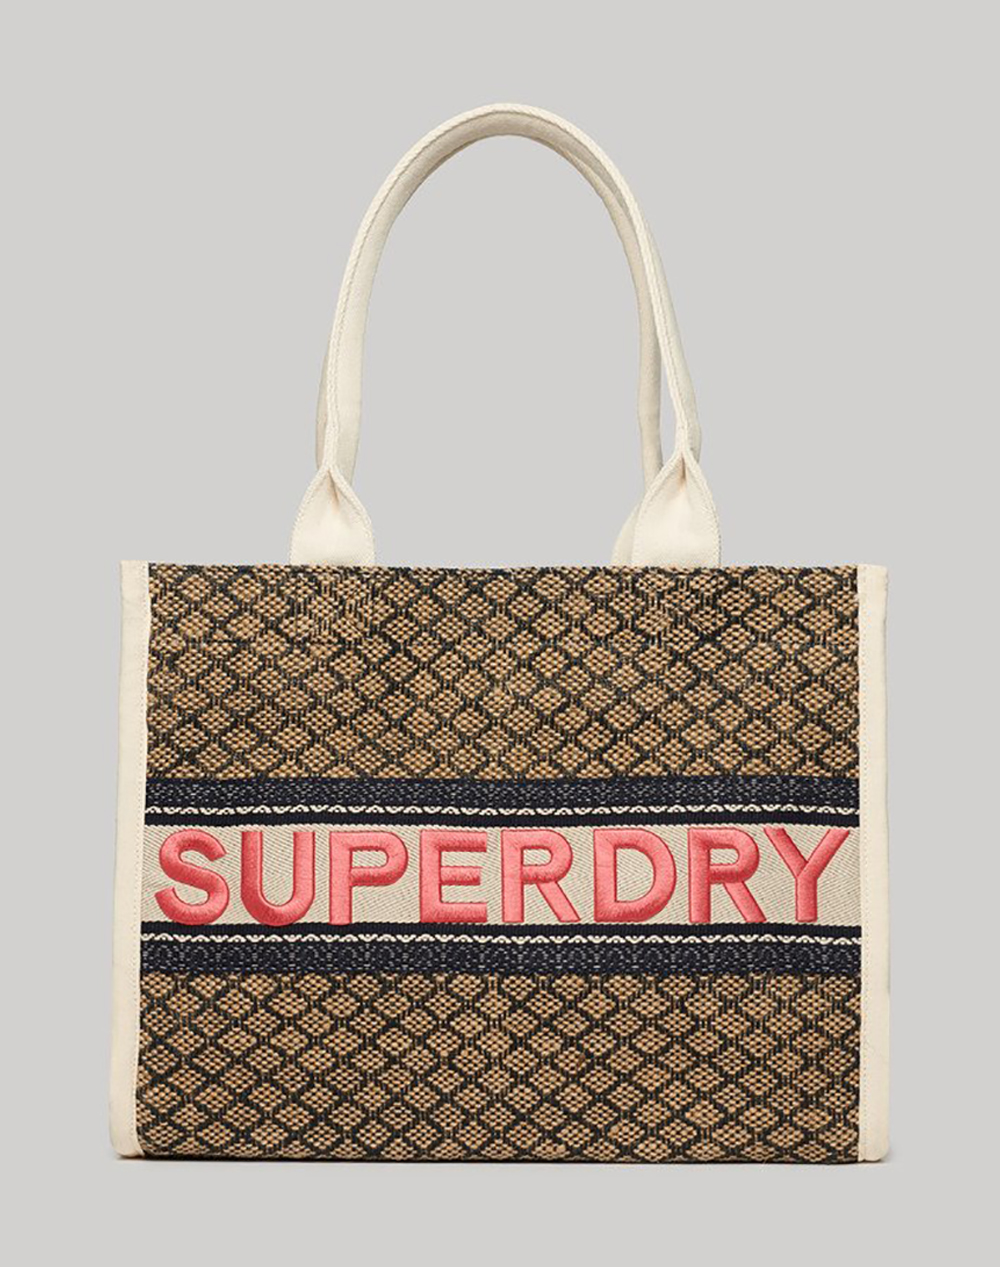 SUPERDRY D2 SDRY LUXE TOTE BAG ΤΣΑΝΤΑ ΓΥΝΑΙΚΕΙΟ (Διαστάσεις: 32 x 38 x 15 εκ) W9110381A-2HY Mixed 3810ASUPE6220006_XR29600